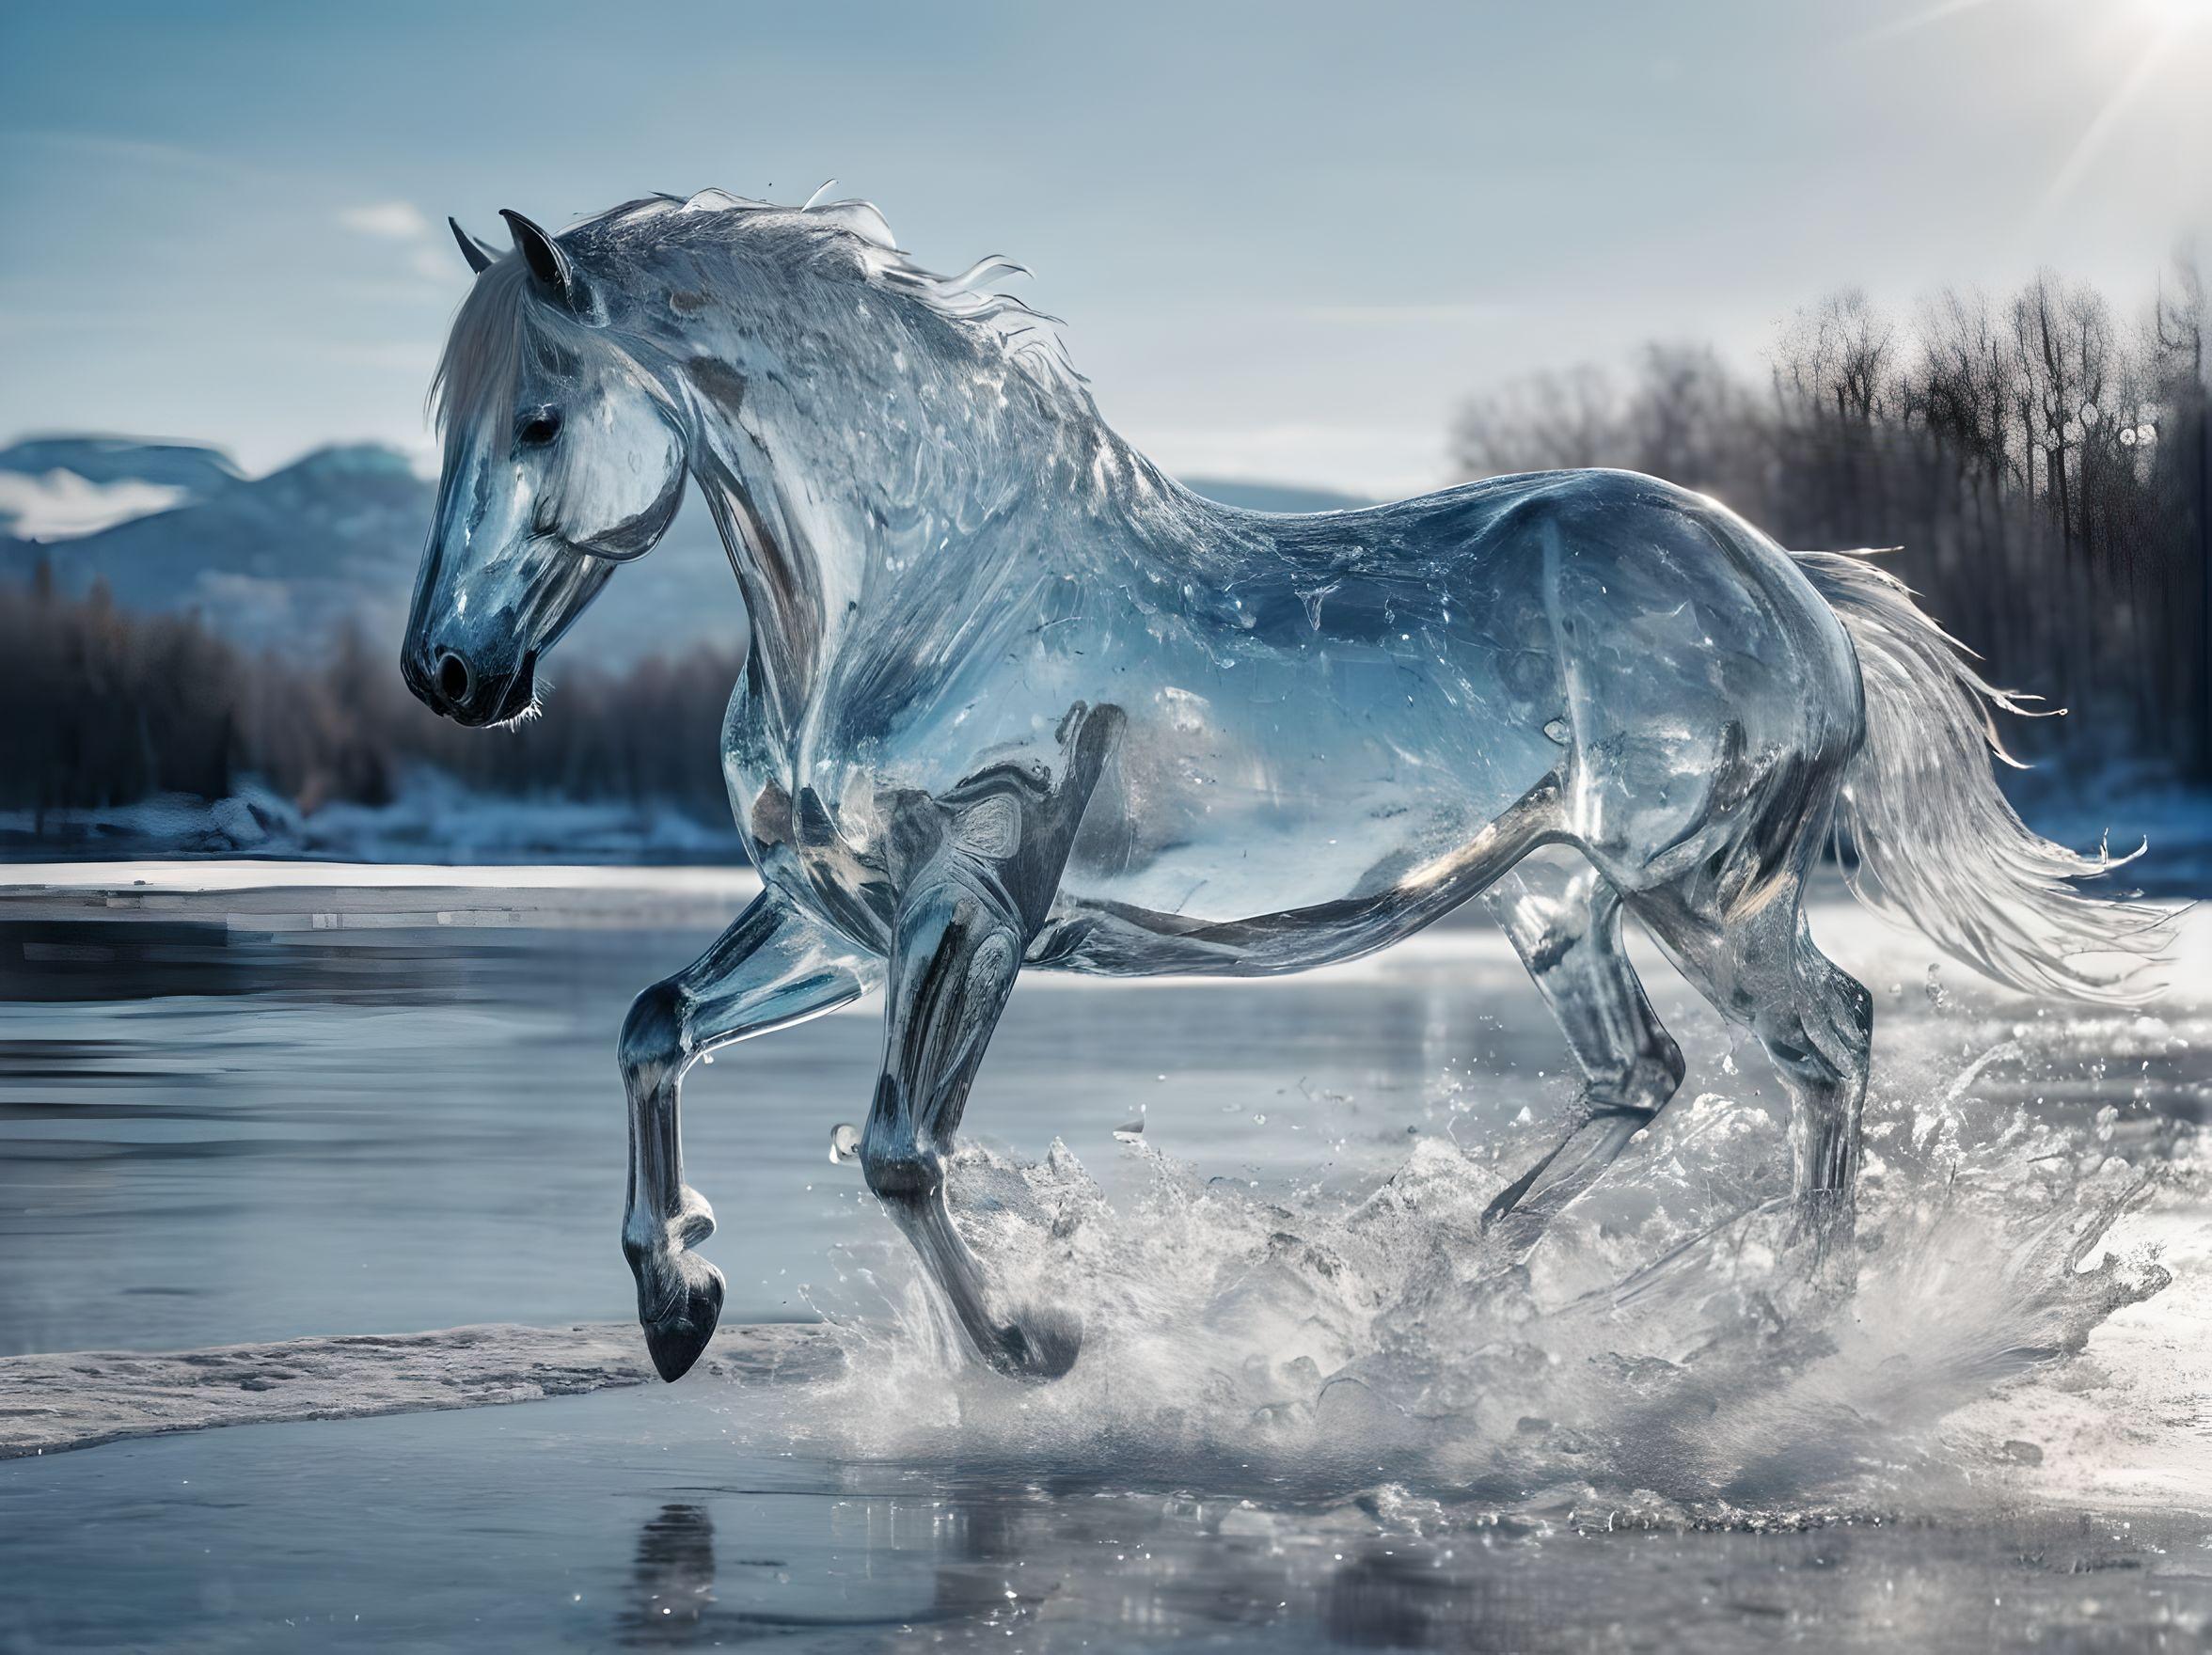 pure water- transparent- has a shape of a transparent horse- illuminating light- feeling alive- running- powerful body movement- winter lake view- crystal clear ice- icy storm scenery 